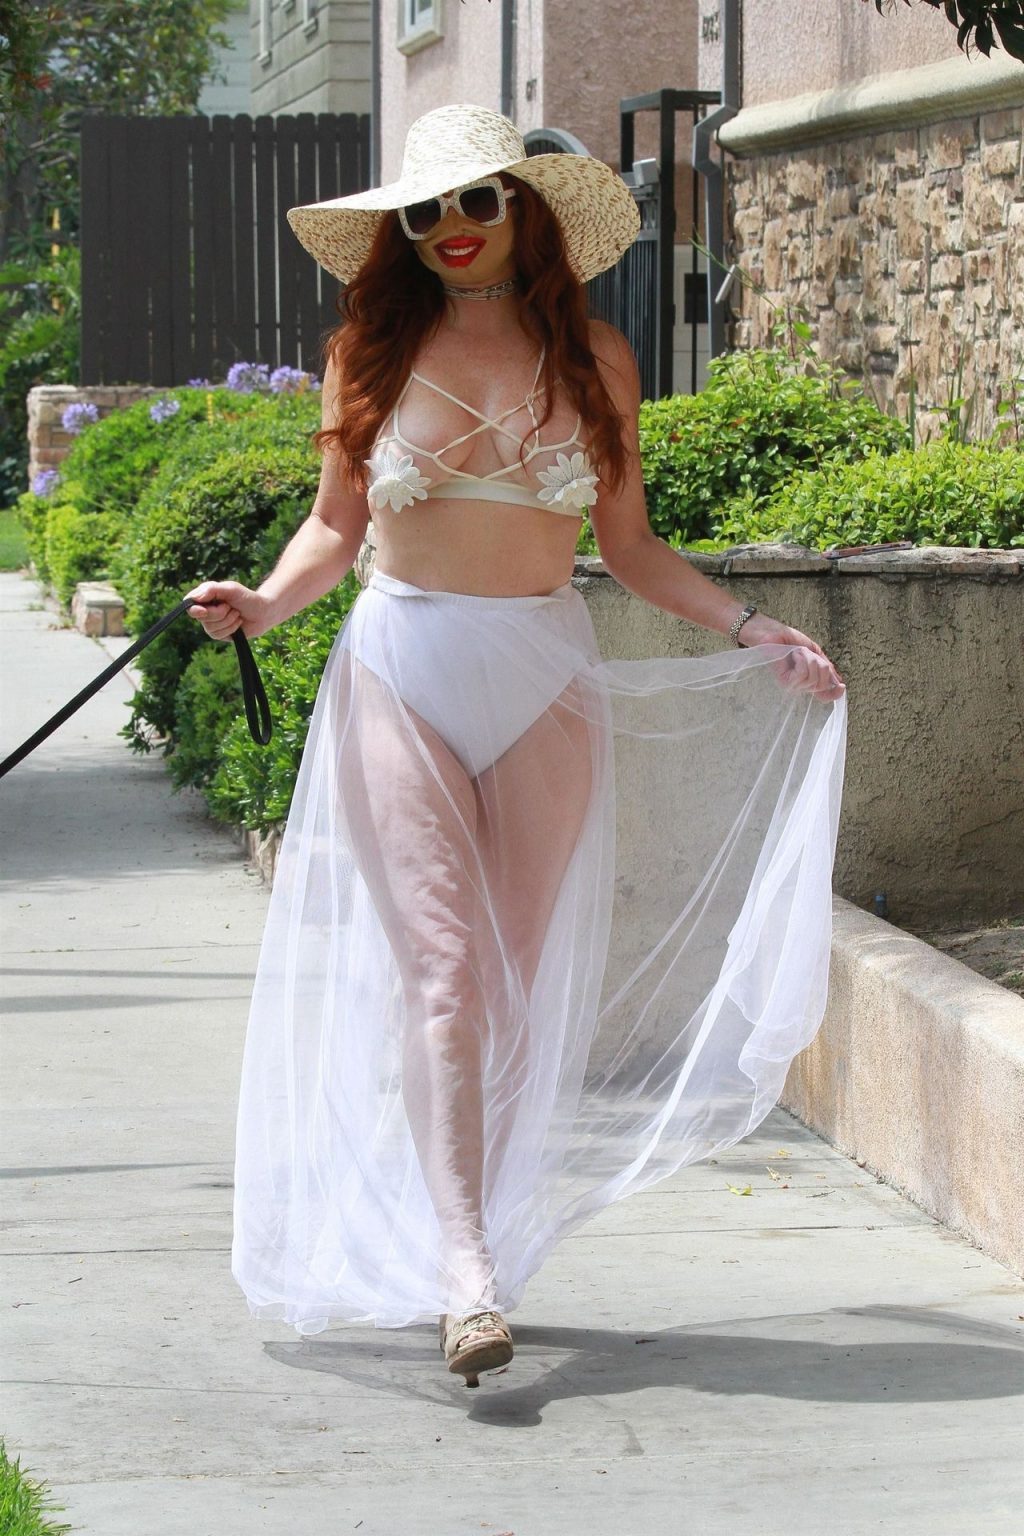 Hot Phoebe Price Poses in a White Dress in LA (53 Photos)